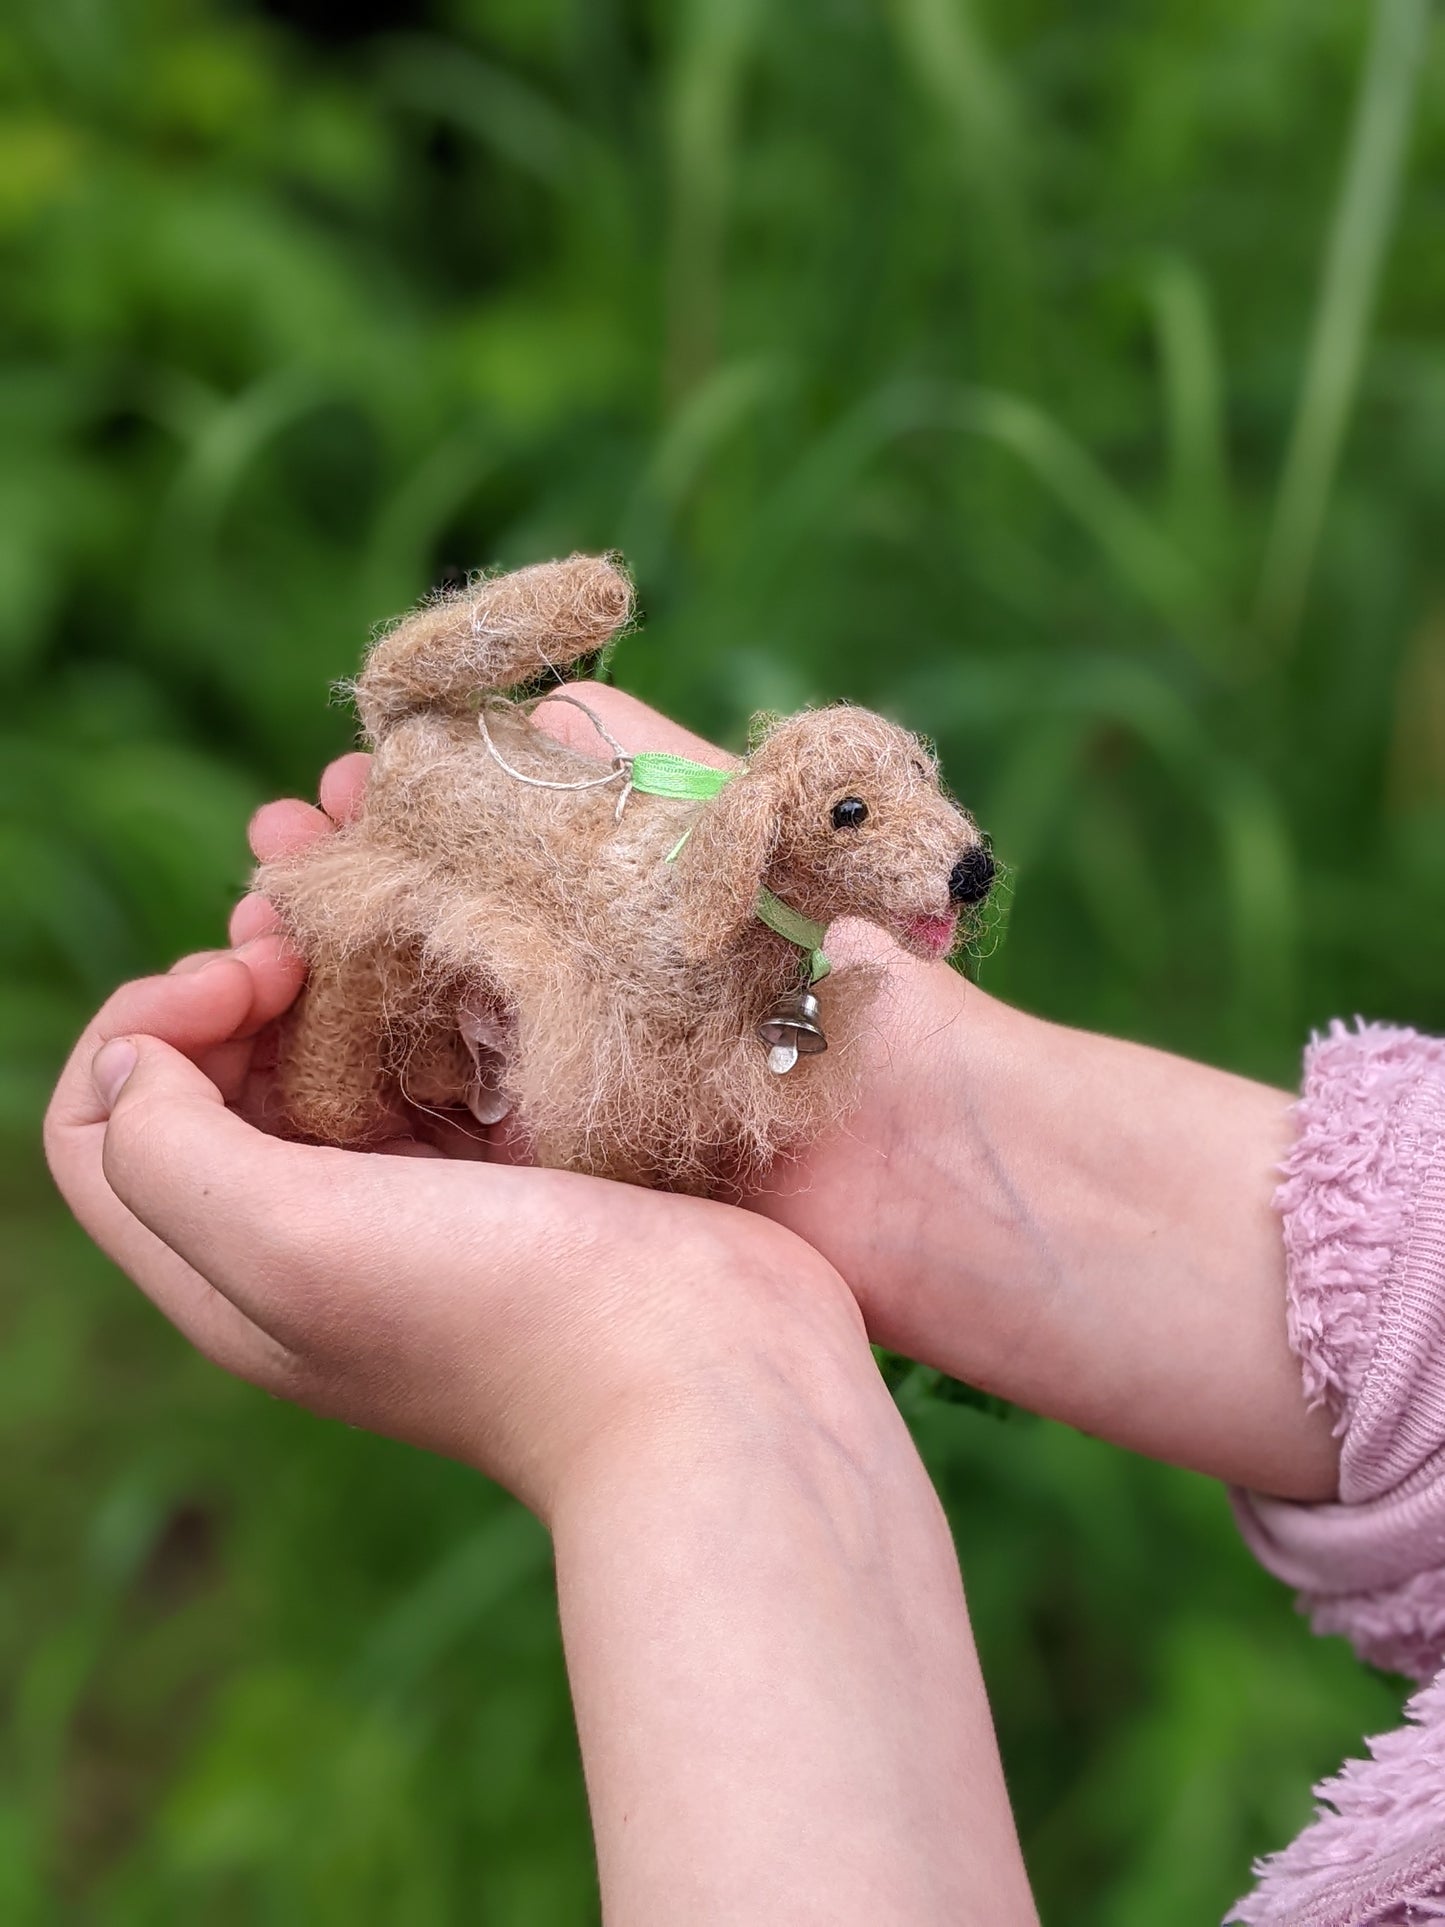 golden retriever from needle felted wool held in child's hands